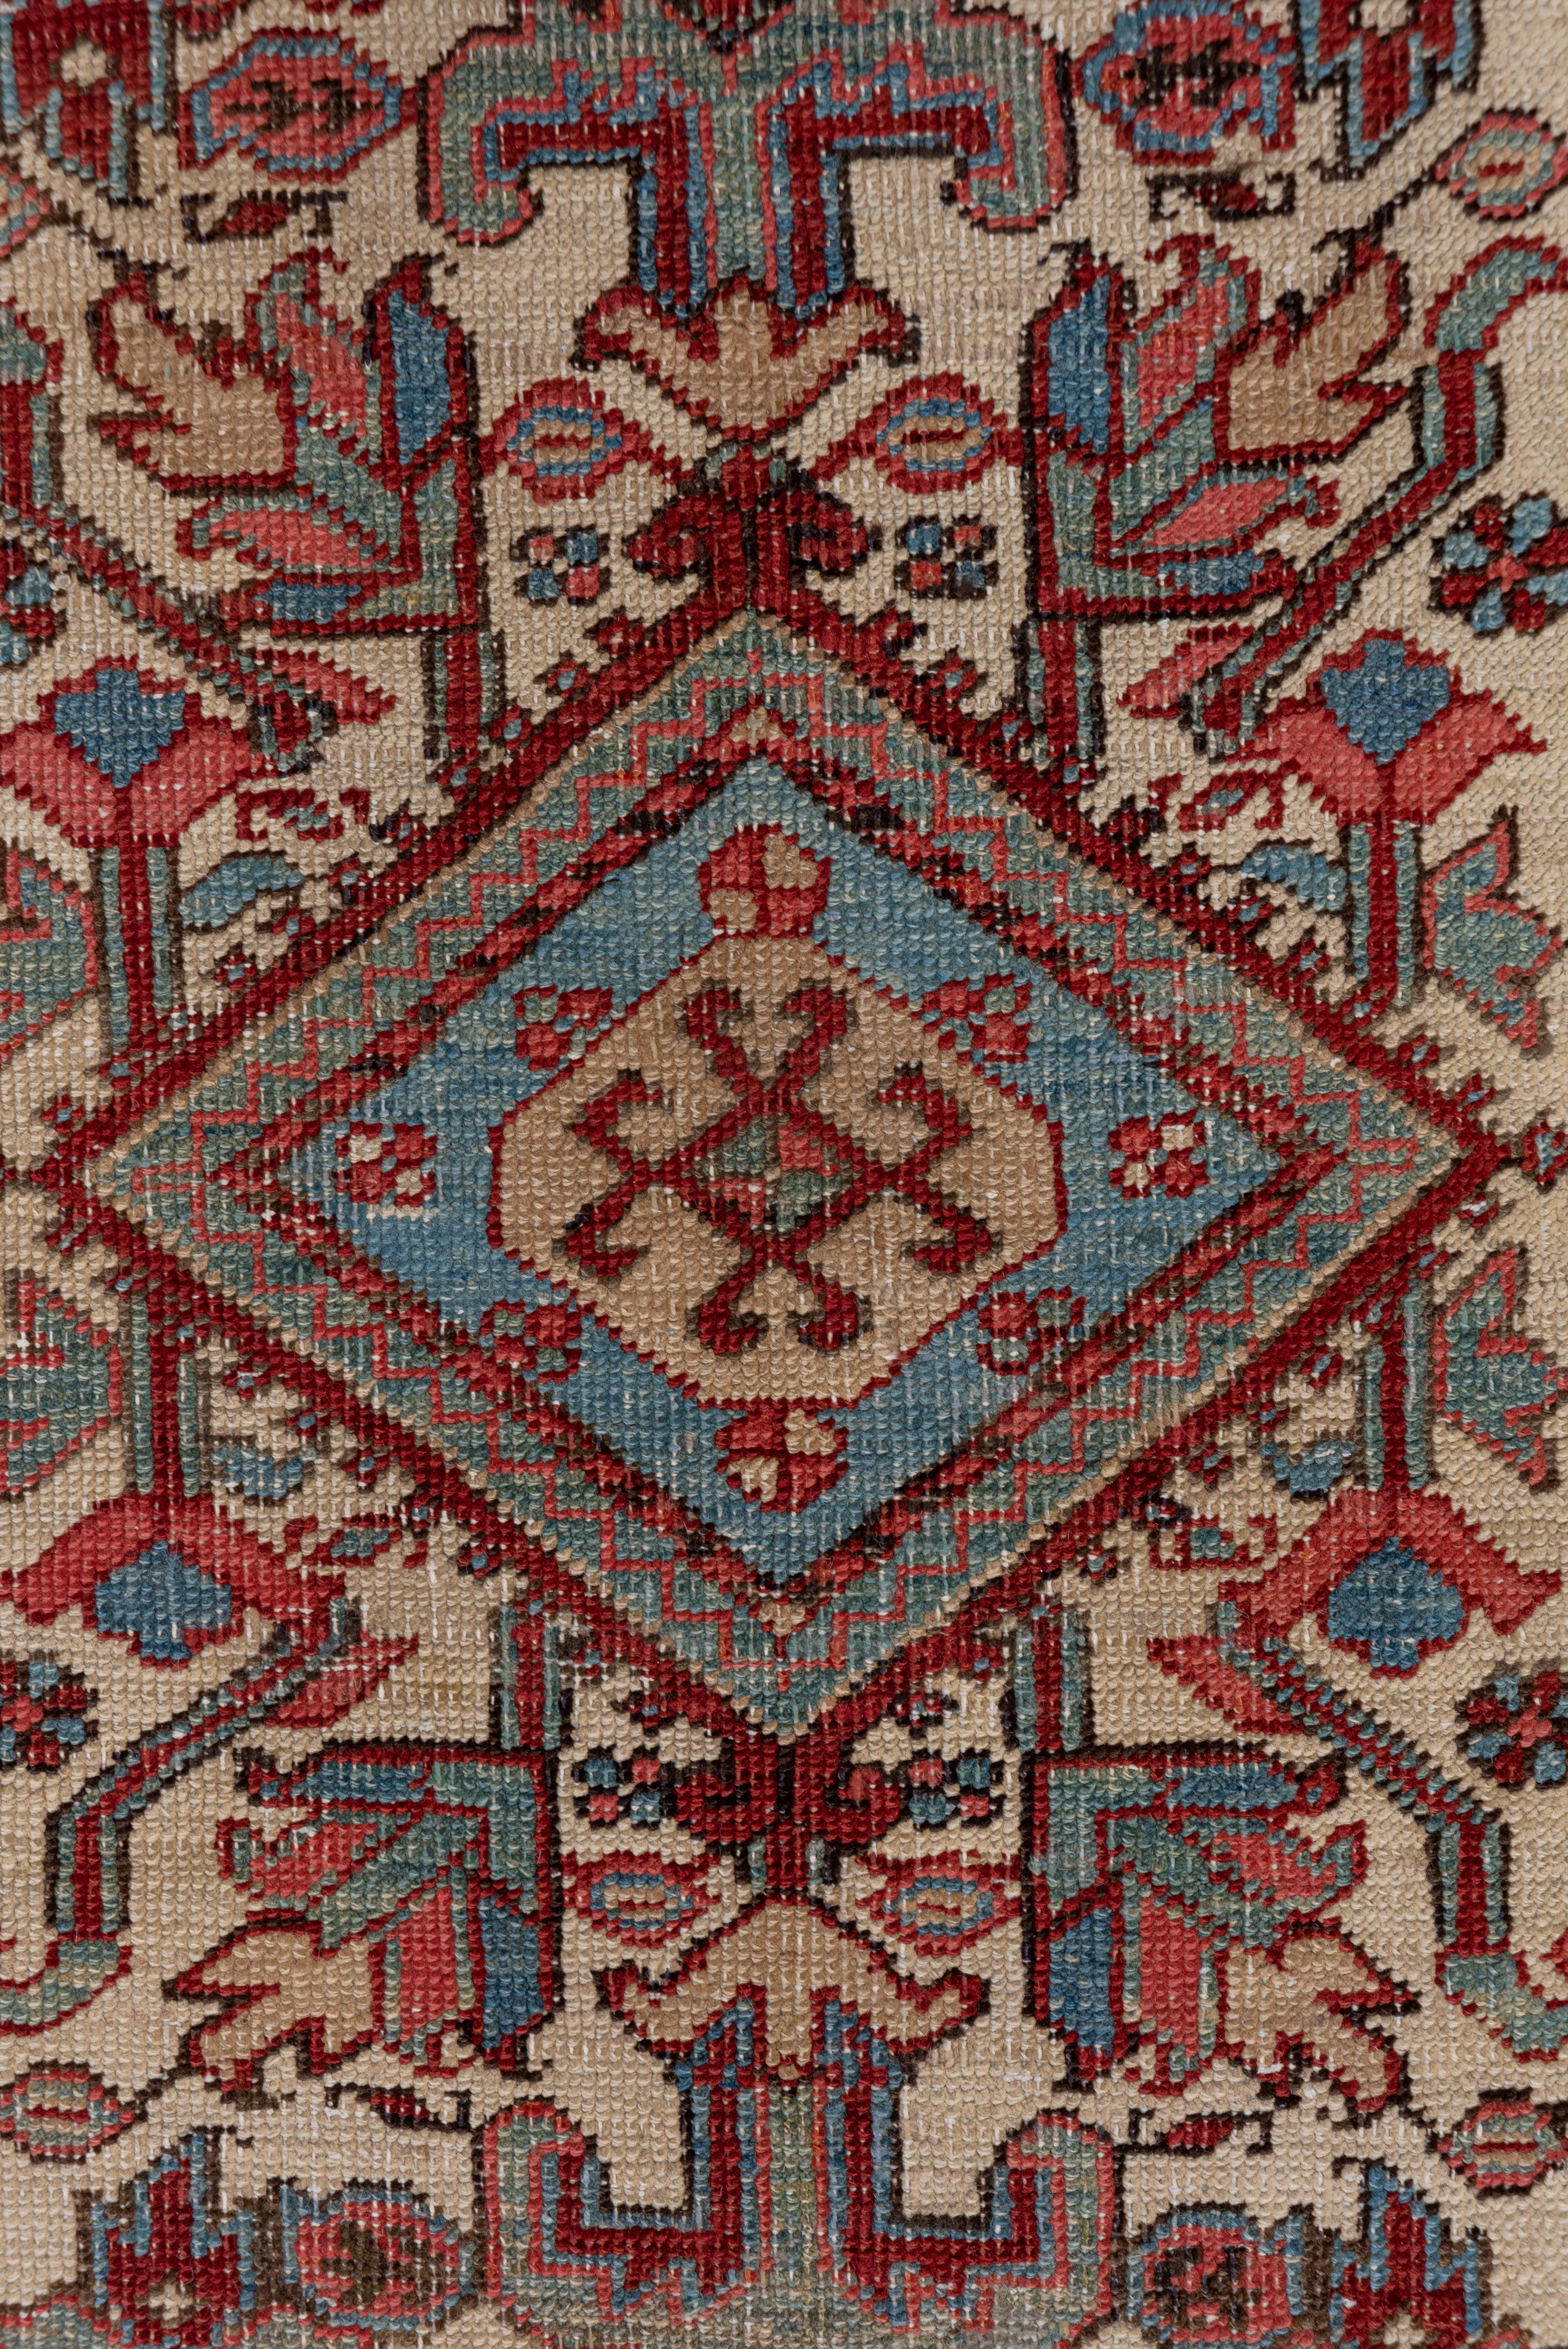 This NW Persian village runner still possesses real character in the three lozenge pole medallion on an ivory field with a fine natural dye palette including rose, light blue, green and red. The light blue border displays a star and slanted bar